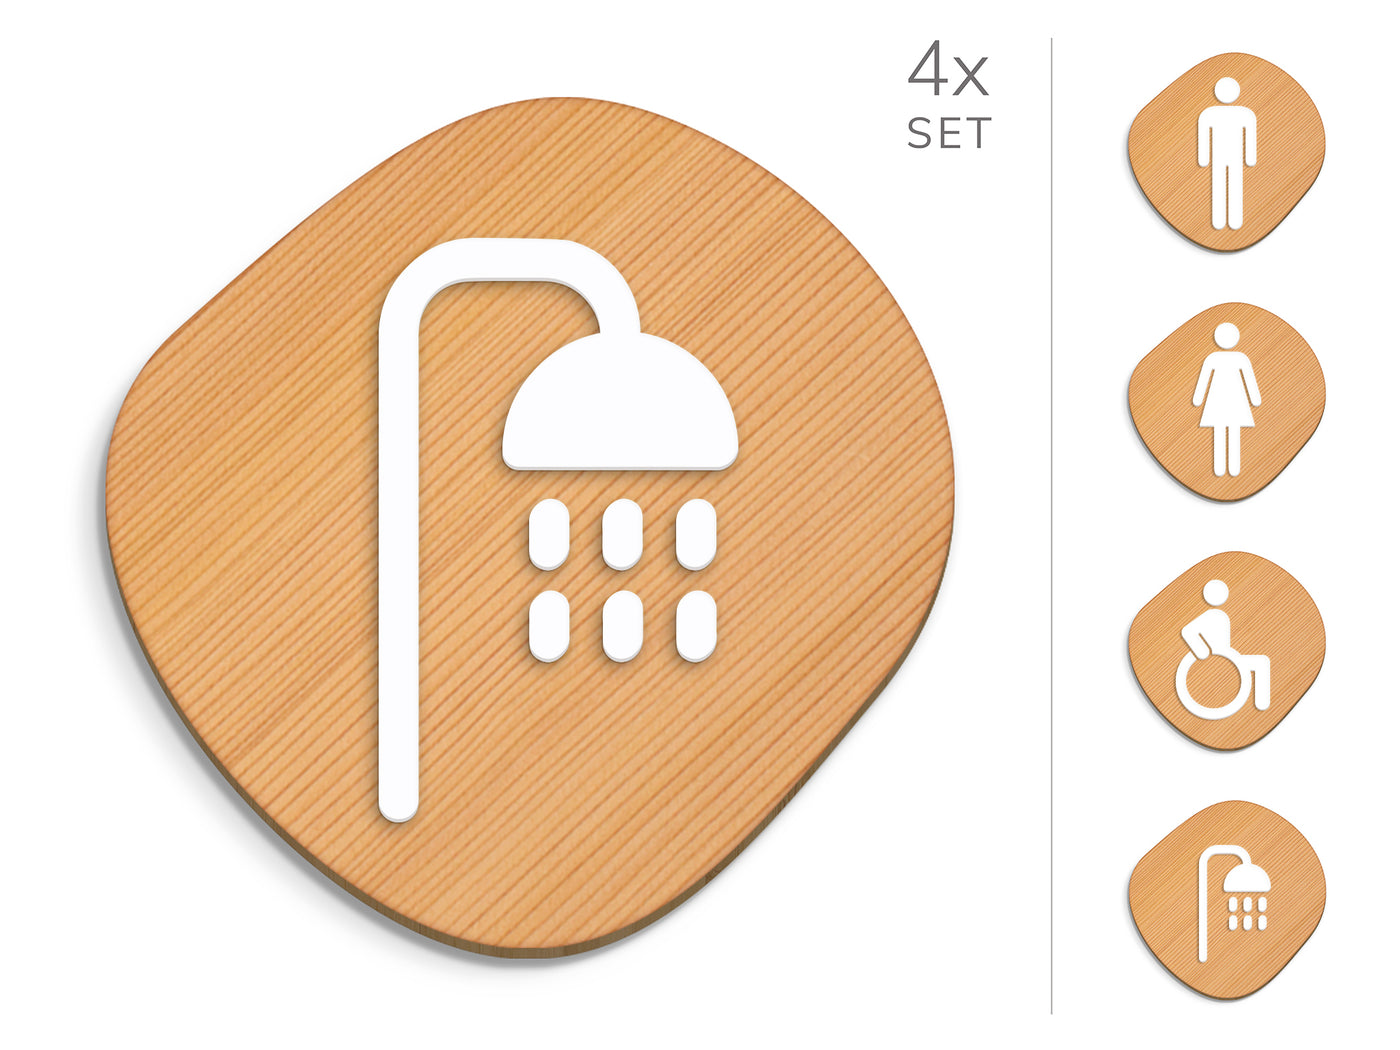 Classic, 4x Stone shaped Base - Restroom Signs Set - Man, Woman, Disabled, Shower